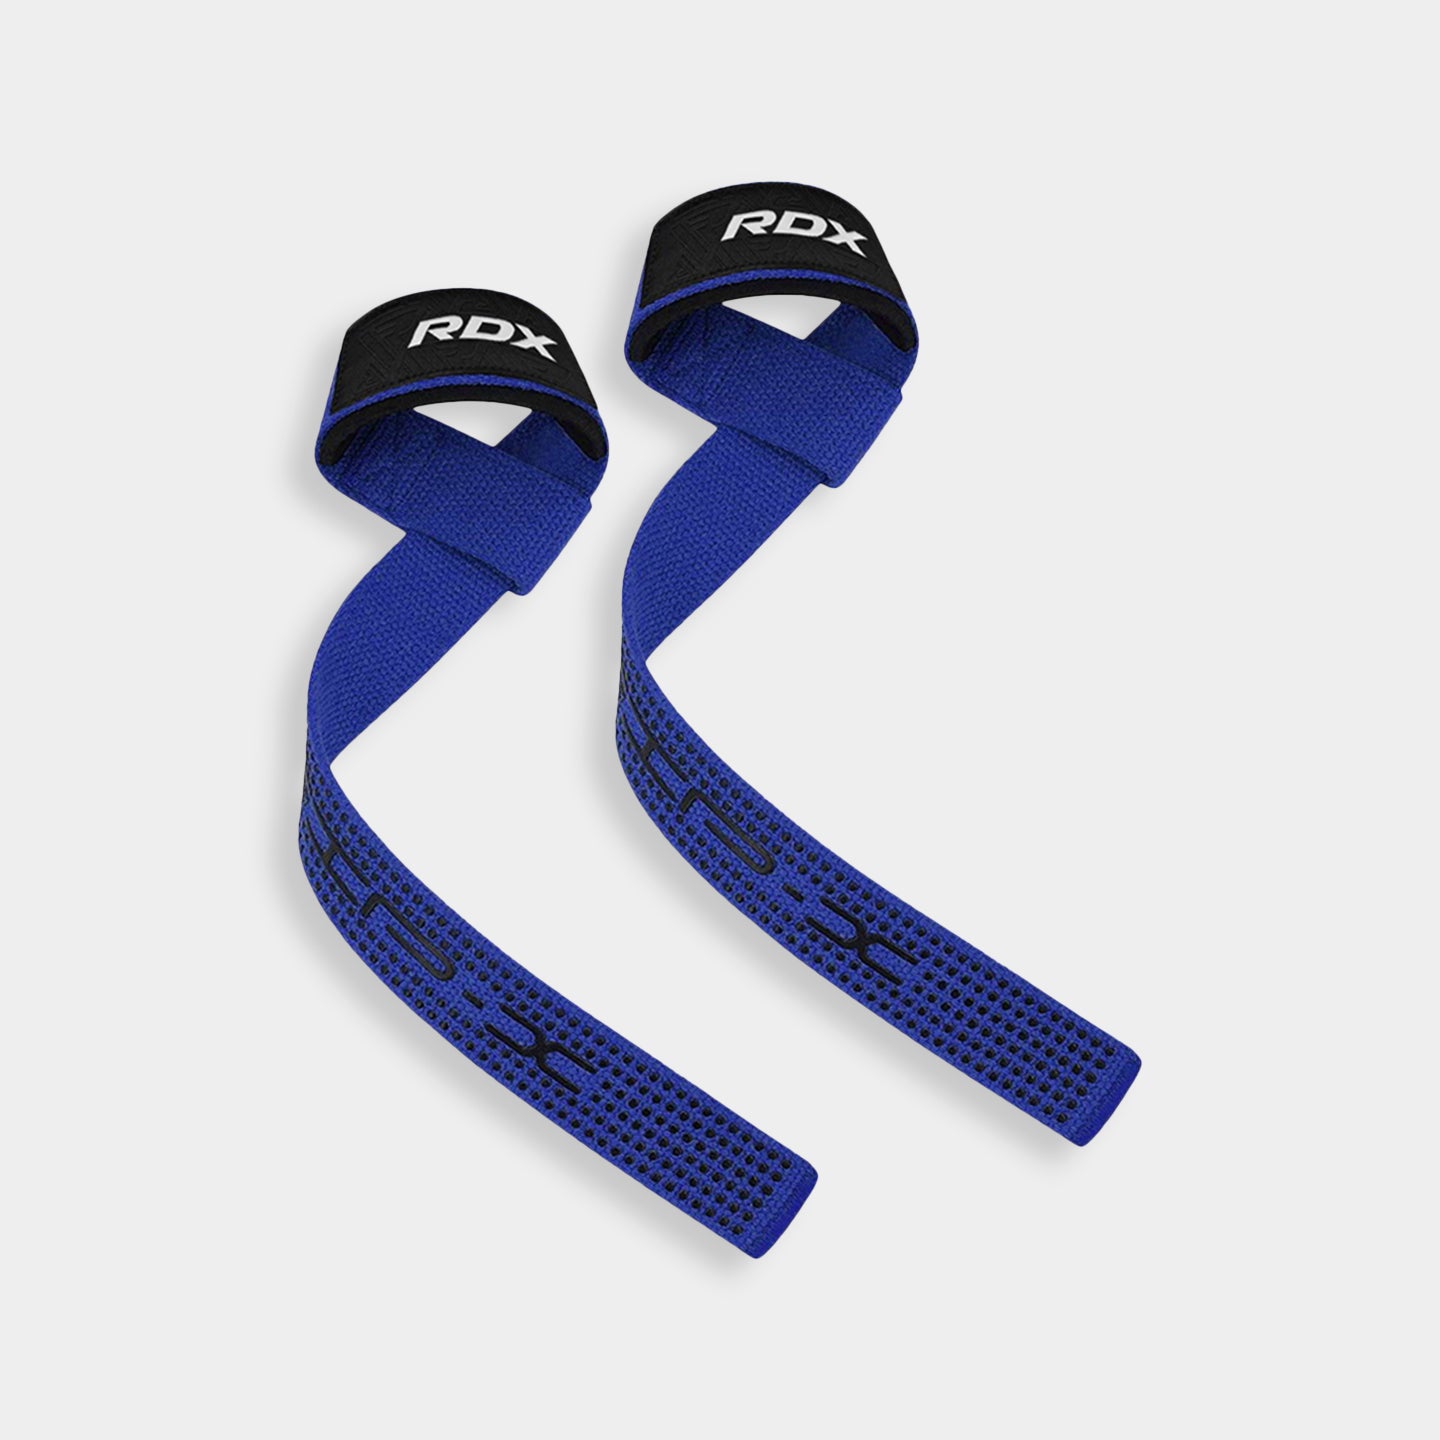 RDX Sports S4 Weightlifting Wrist Straps Weightlifting And Strength Training, Standard Size, Blue A1